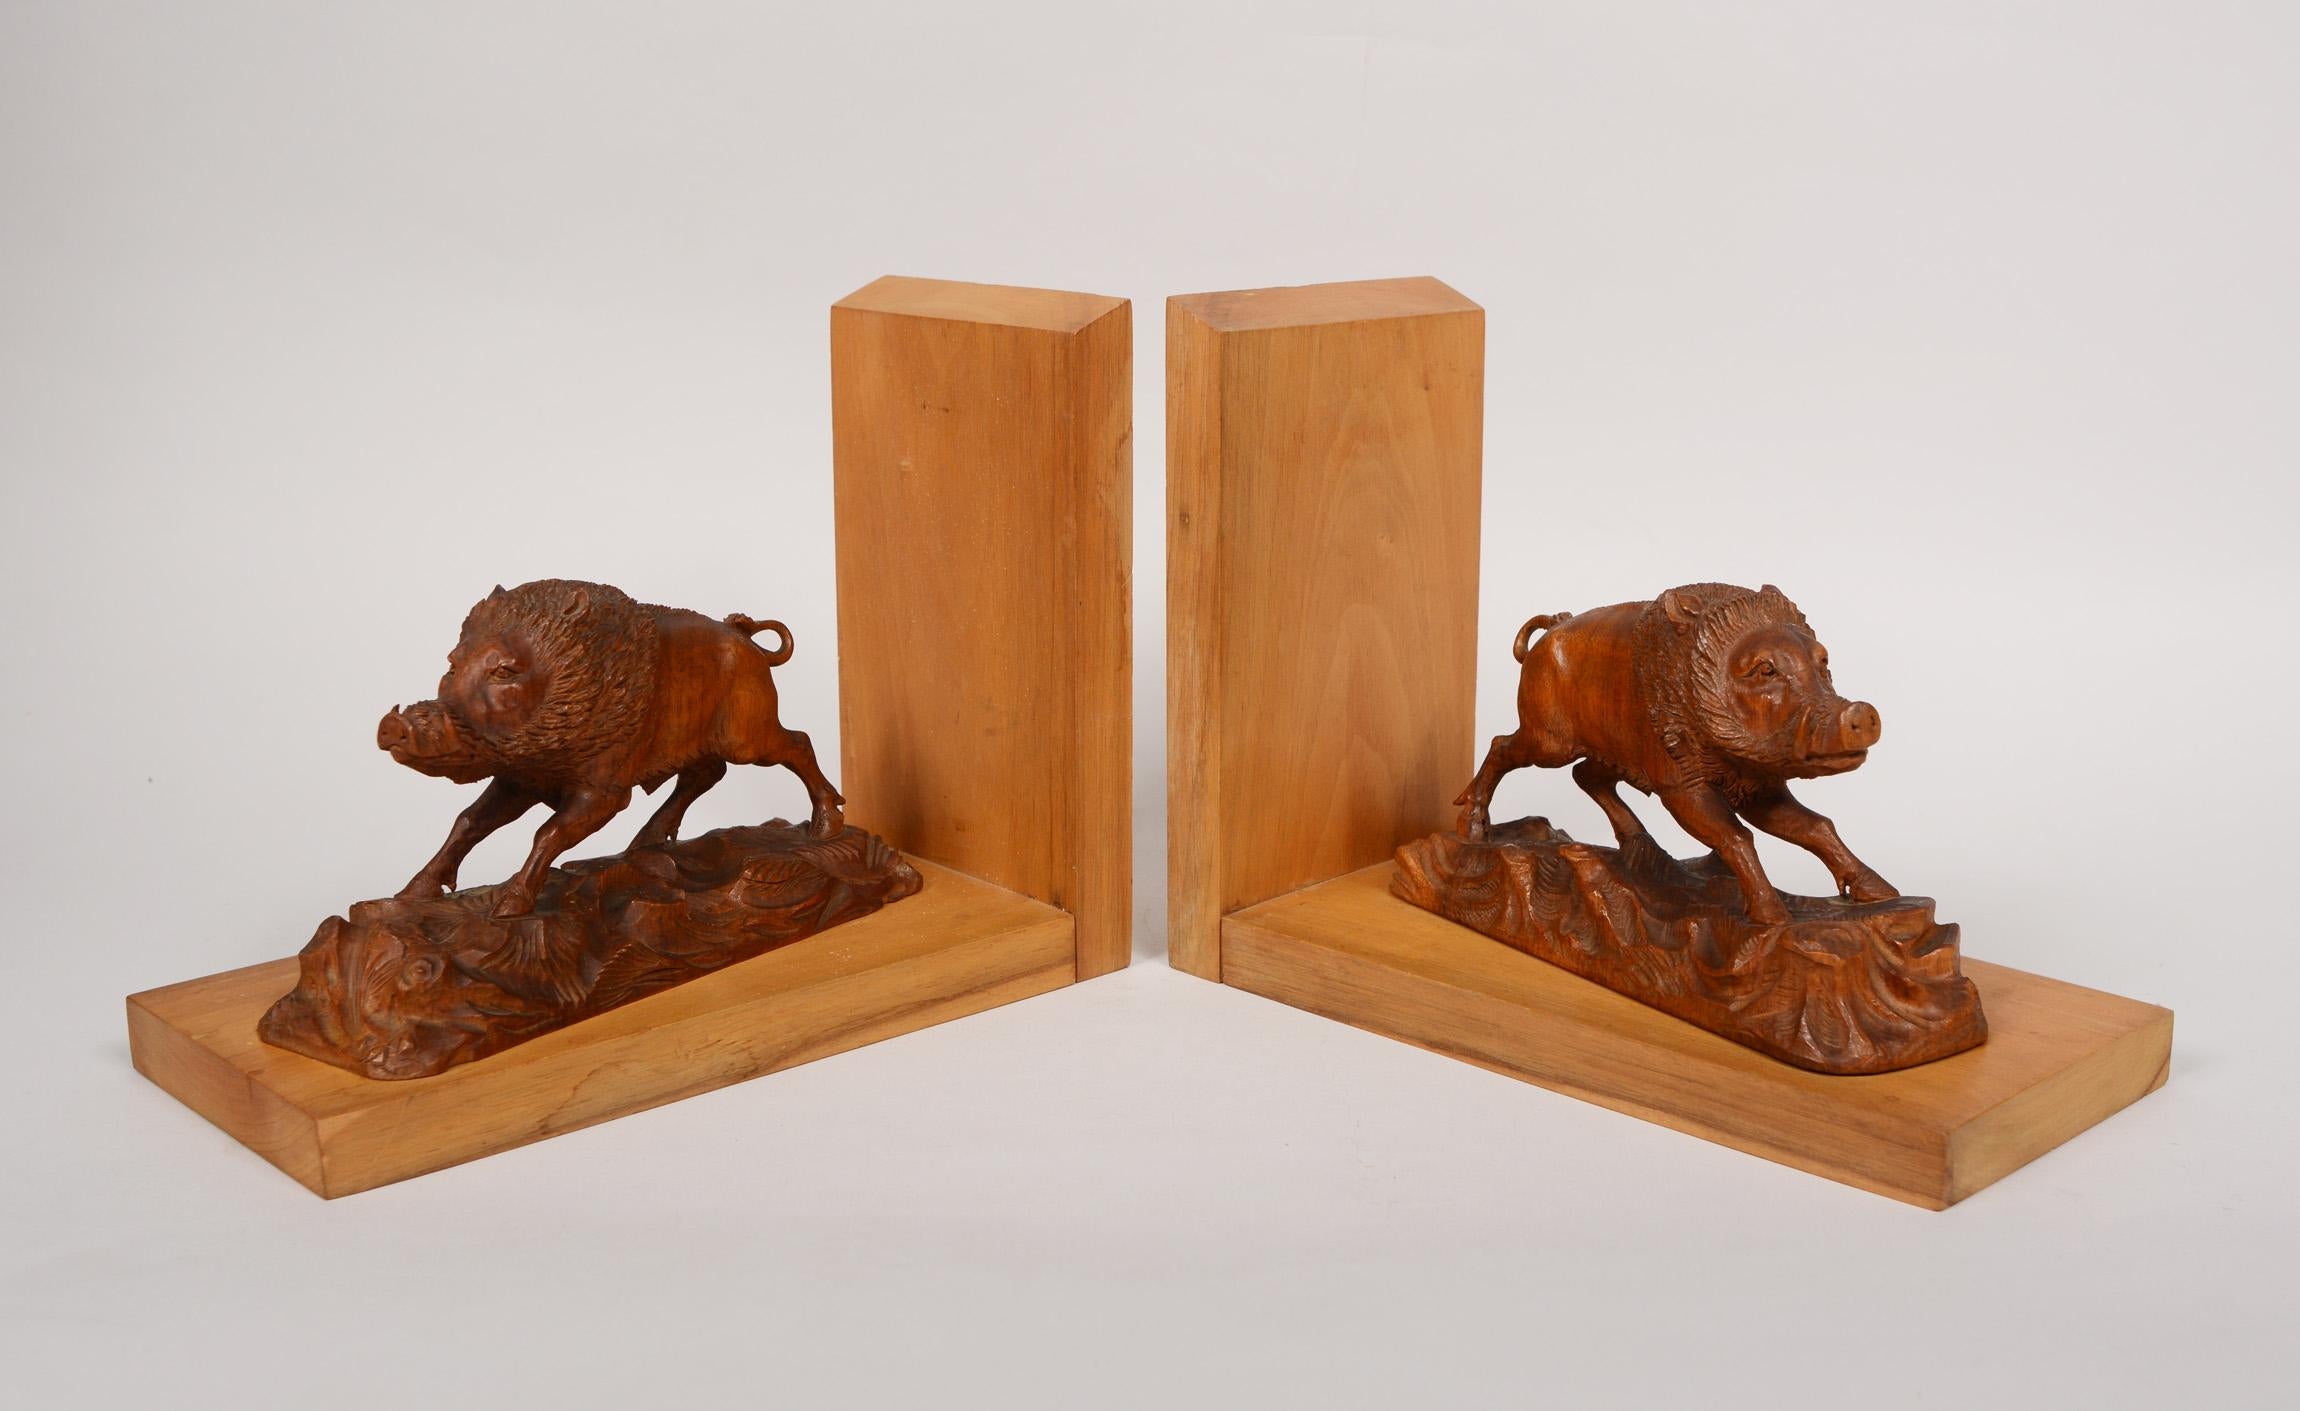 Pair of black forest carved boar bookends. The carving on these has excellent detail and craftsmanship. These were purchased by an army major that was stationed in Germany following WWII. We believe these were carved about that time.